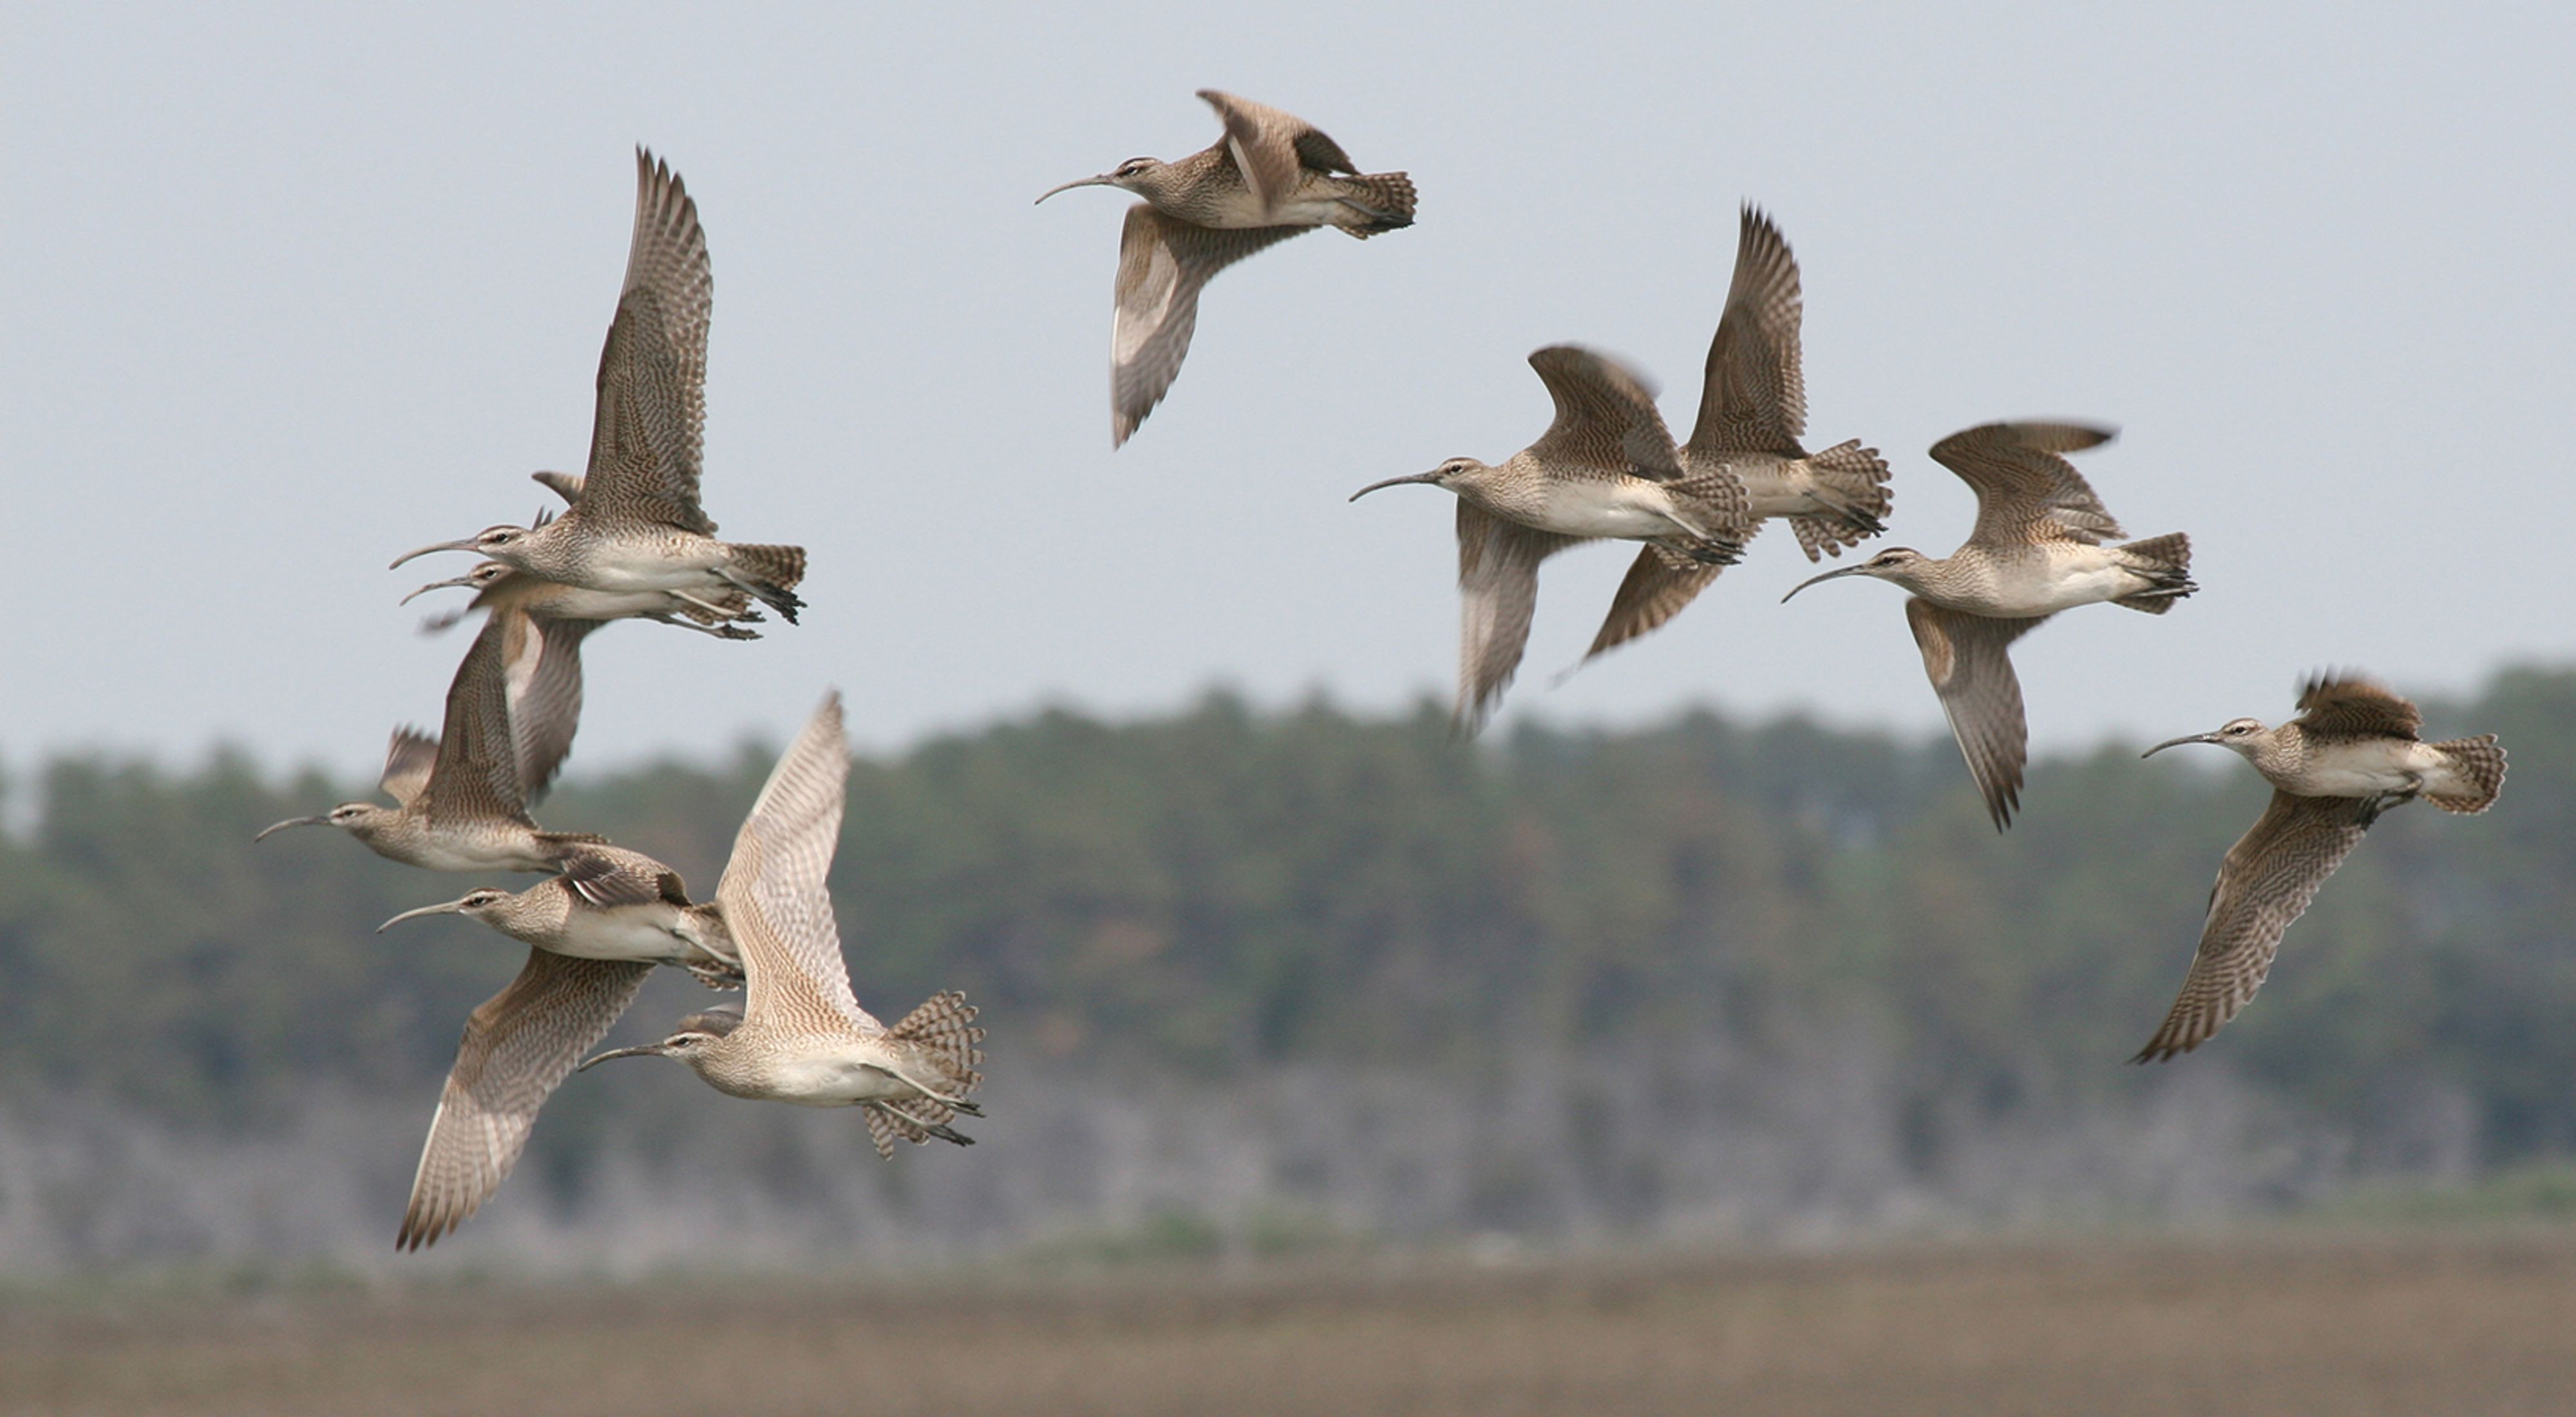 A flock of ten white and tan birds with long, thin beaks in flight.